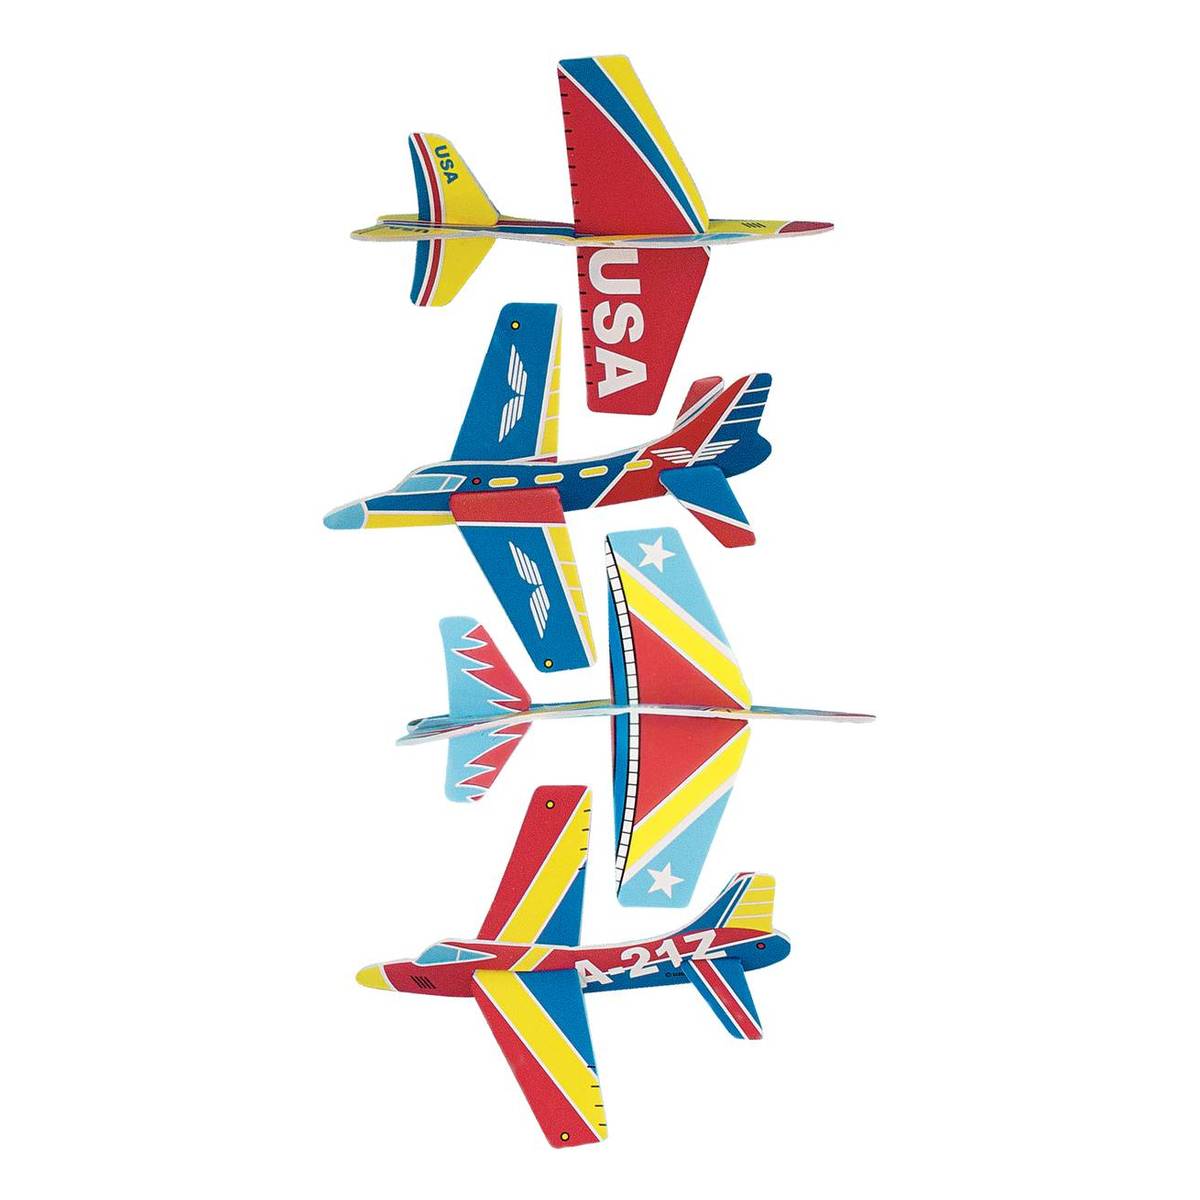 Foam Glider Plane Kit With Stickers 22" Wing Span Hobby Craft Toy 